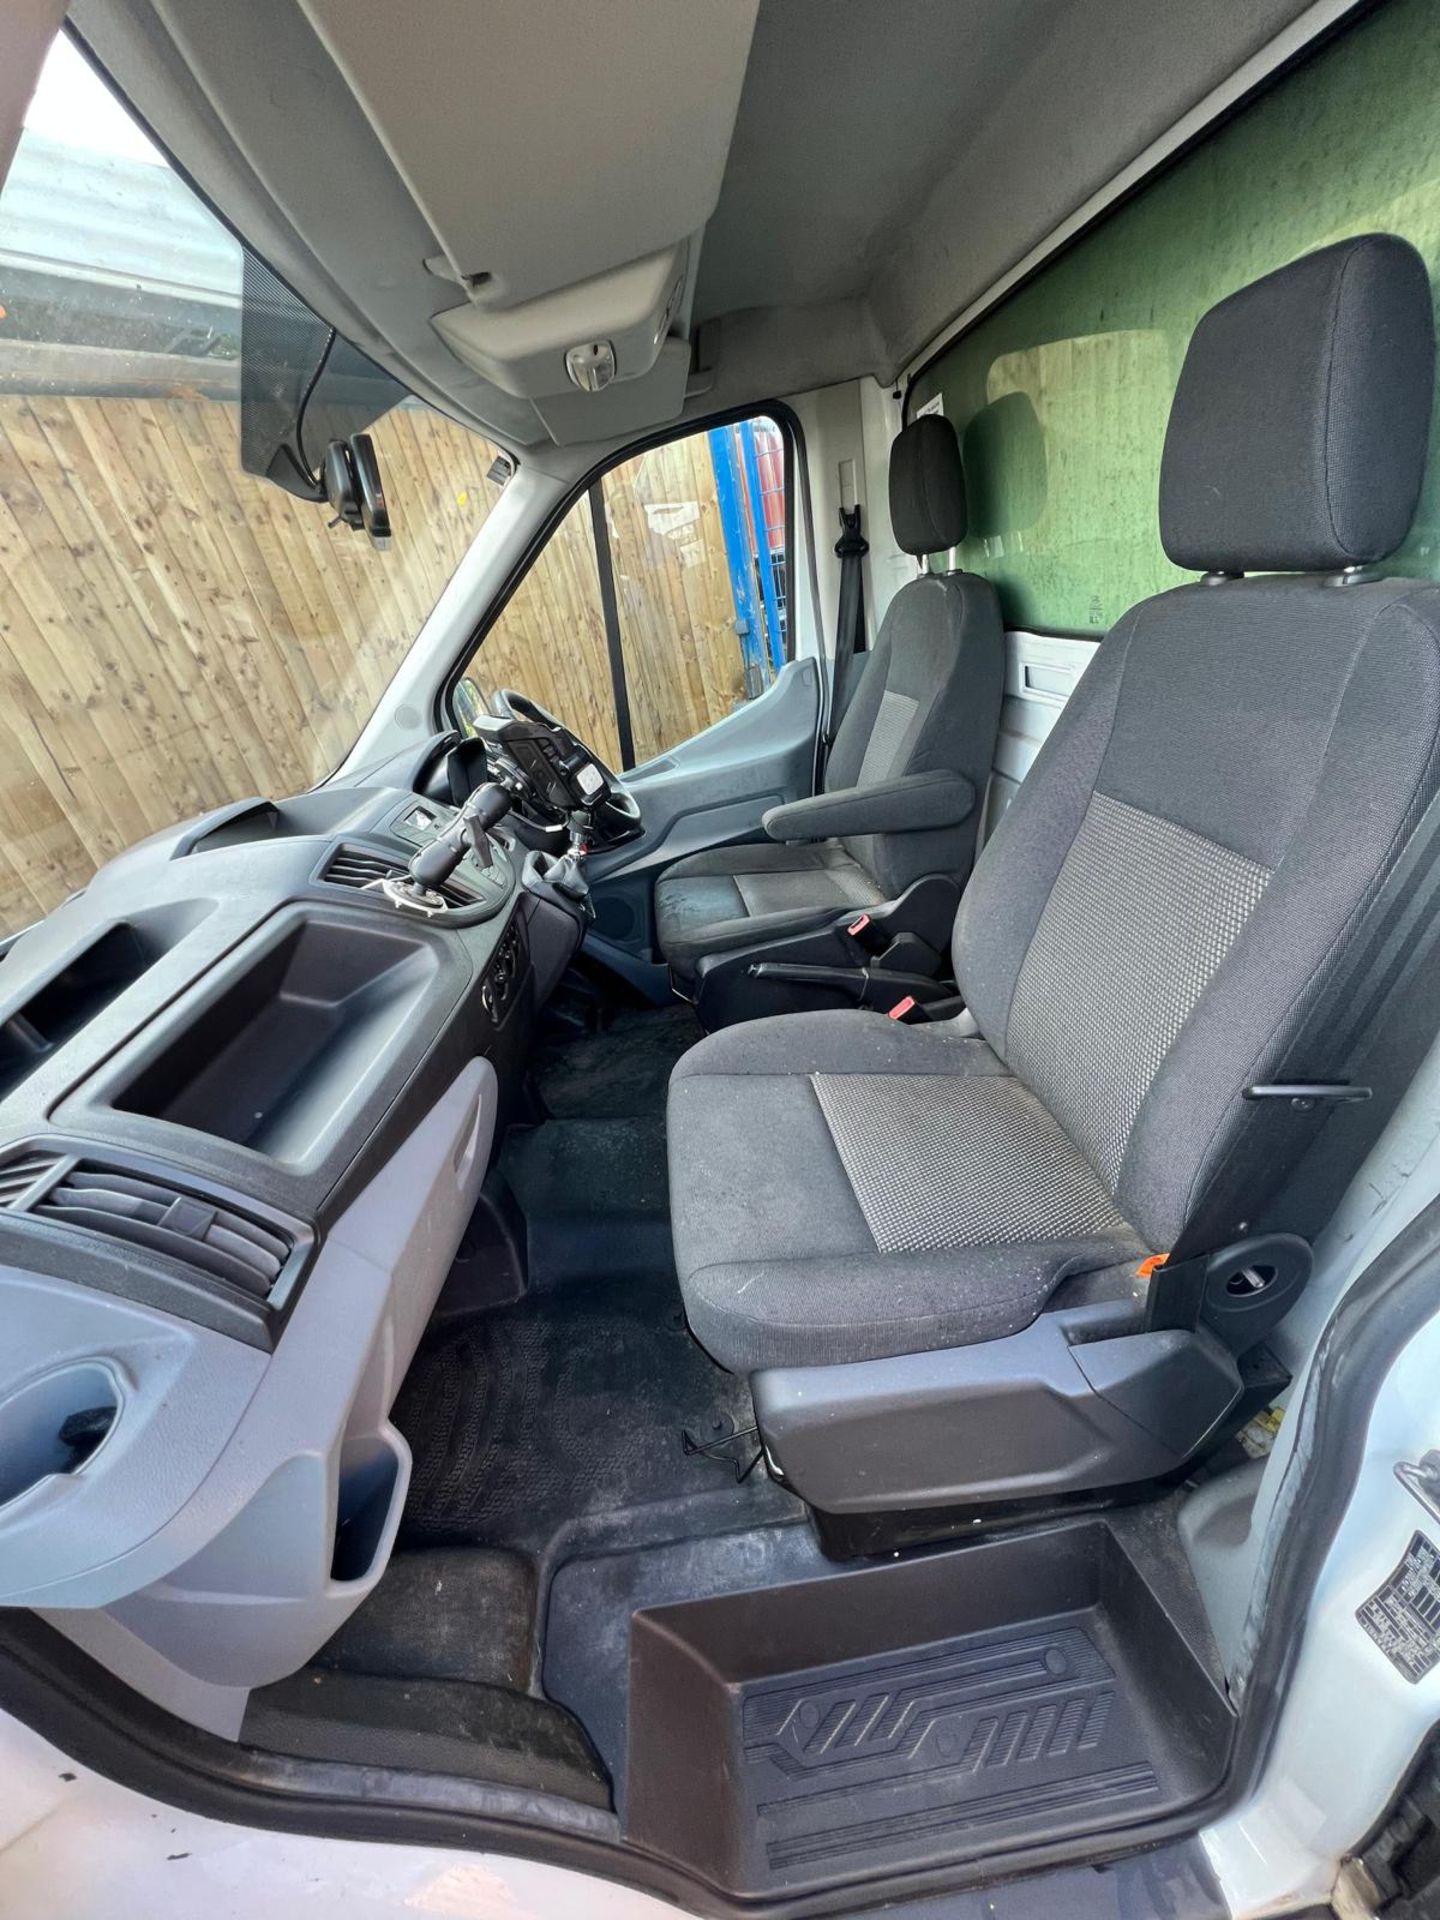 FORD TRANSIT BOX VAN 2017 LUTON EURO6 LWB 6 SPEED MANUAL 1COMPANY OWNER FROM NEW - Image 8 of 14